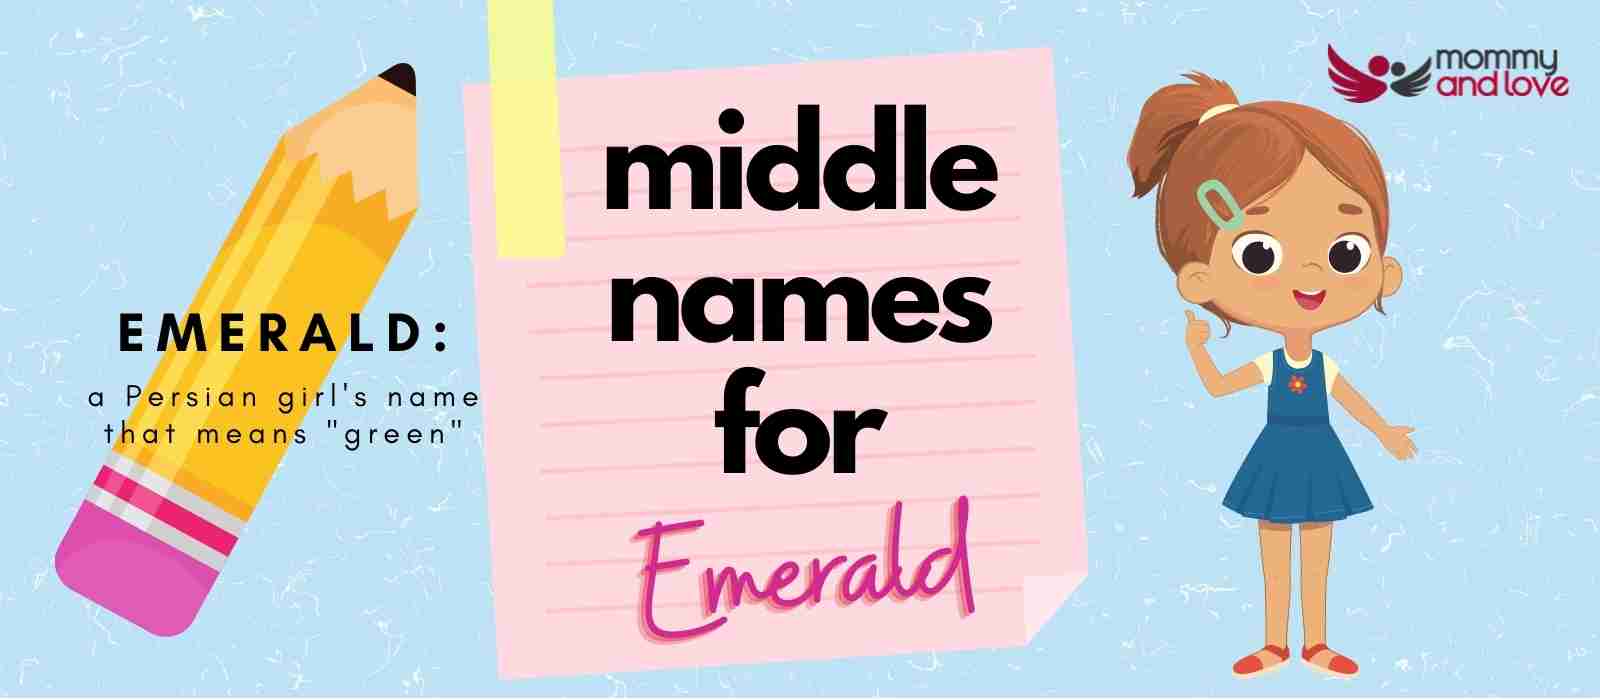 Middle Names for Emerald